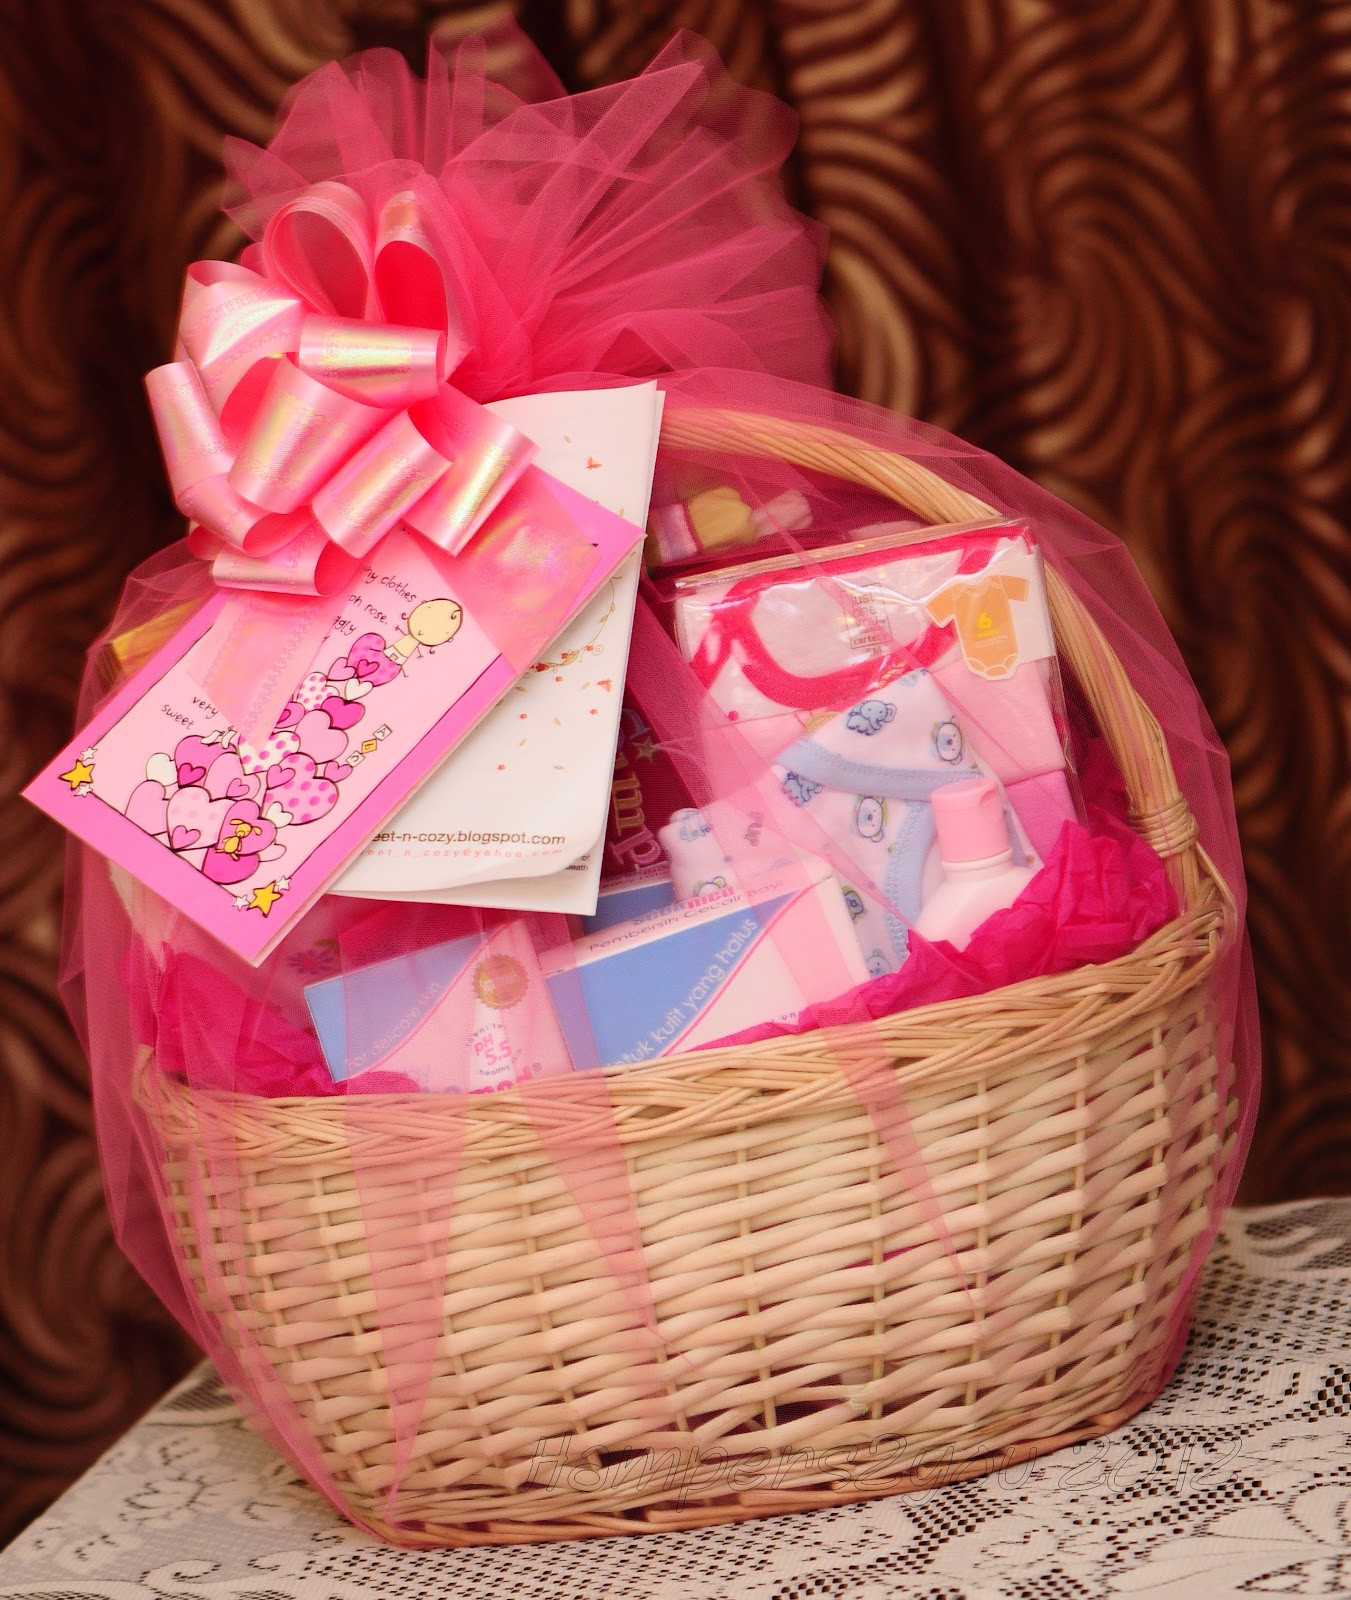 Baby Girls Gifts
 Hampers2you Baby Gift Baskets for Newborn Girl